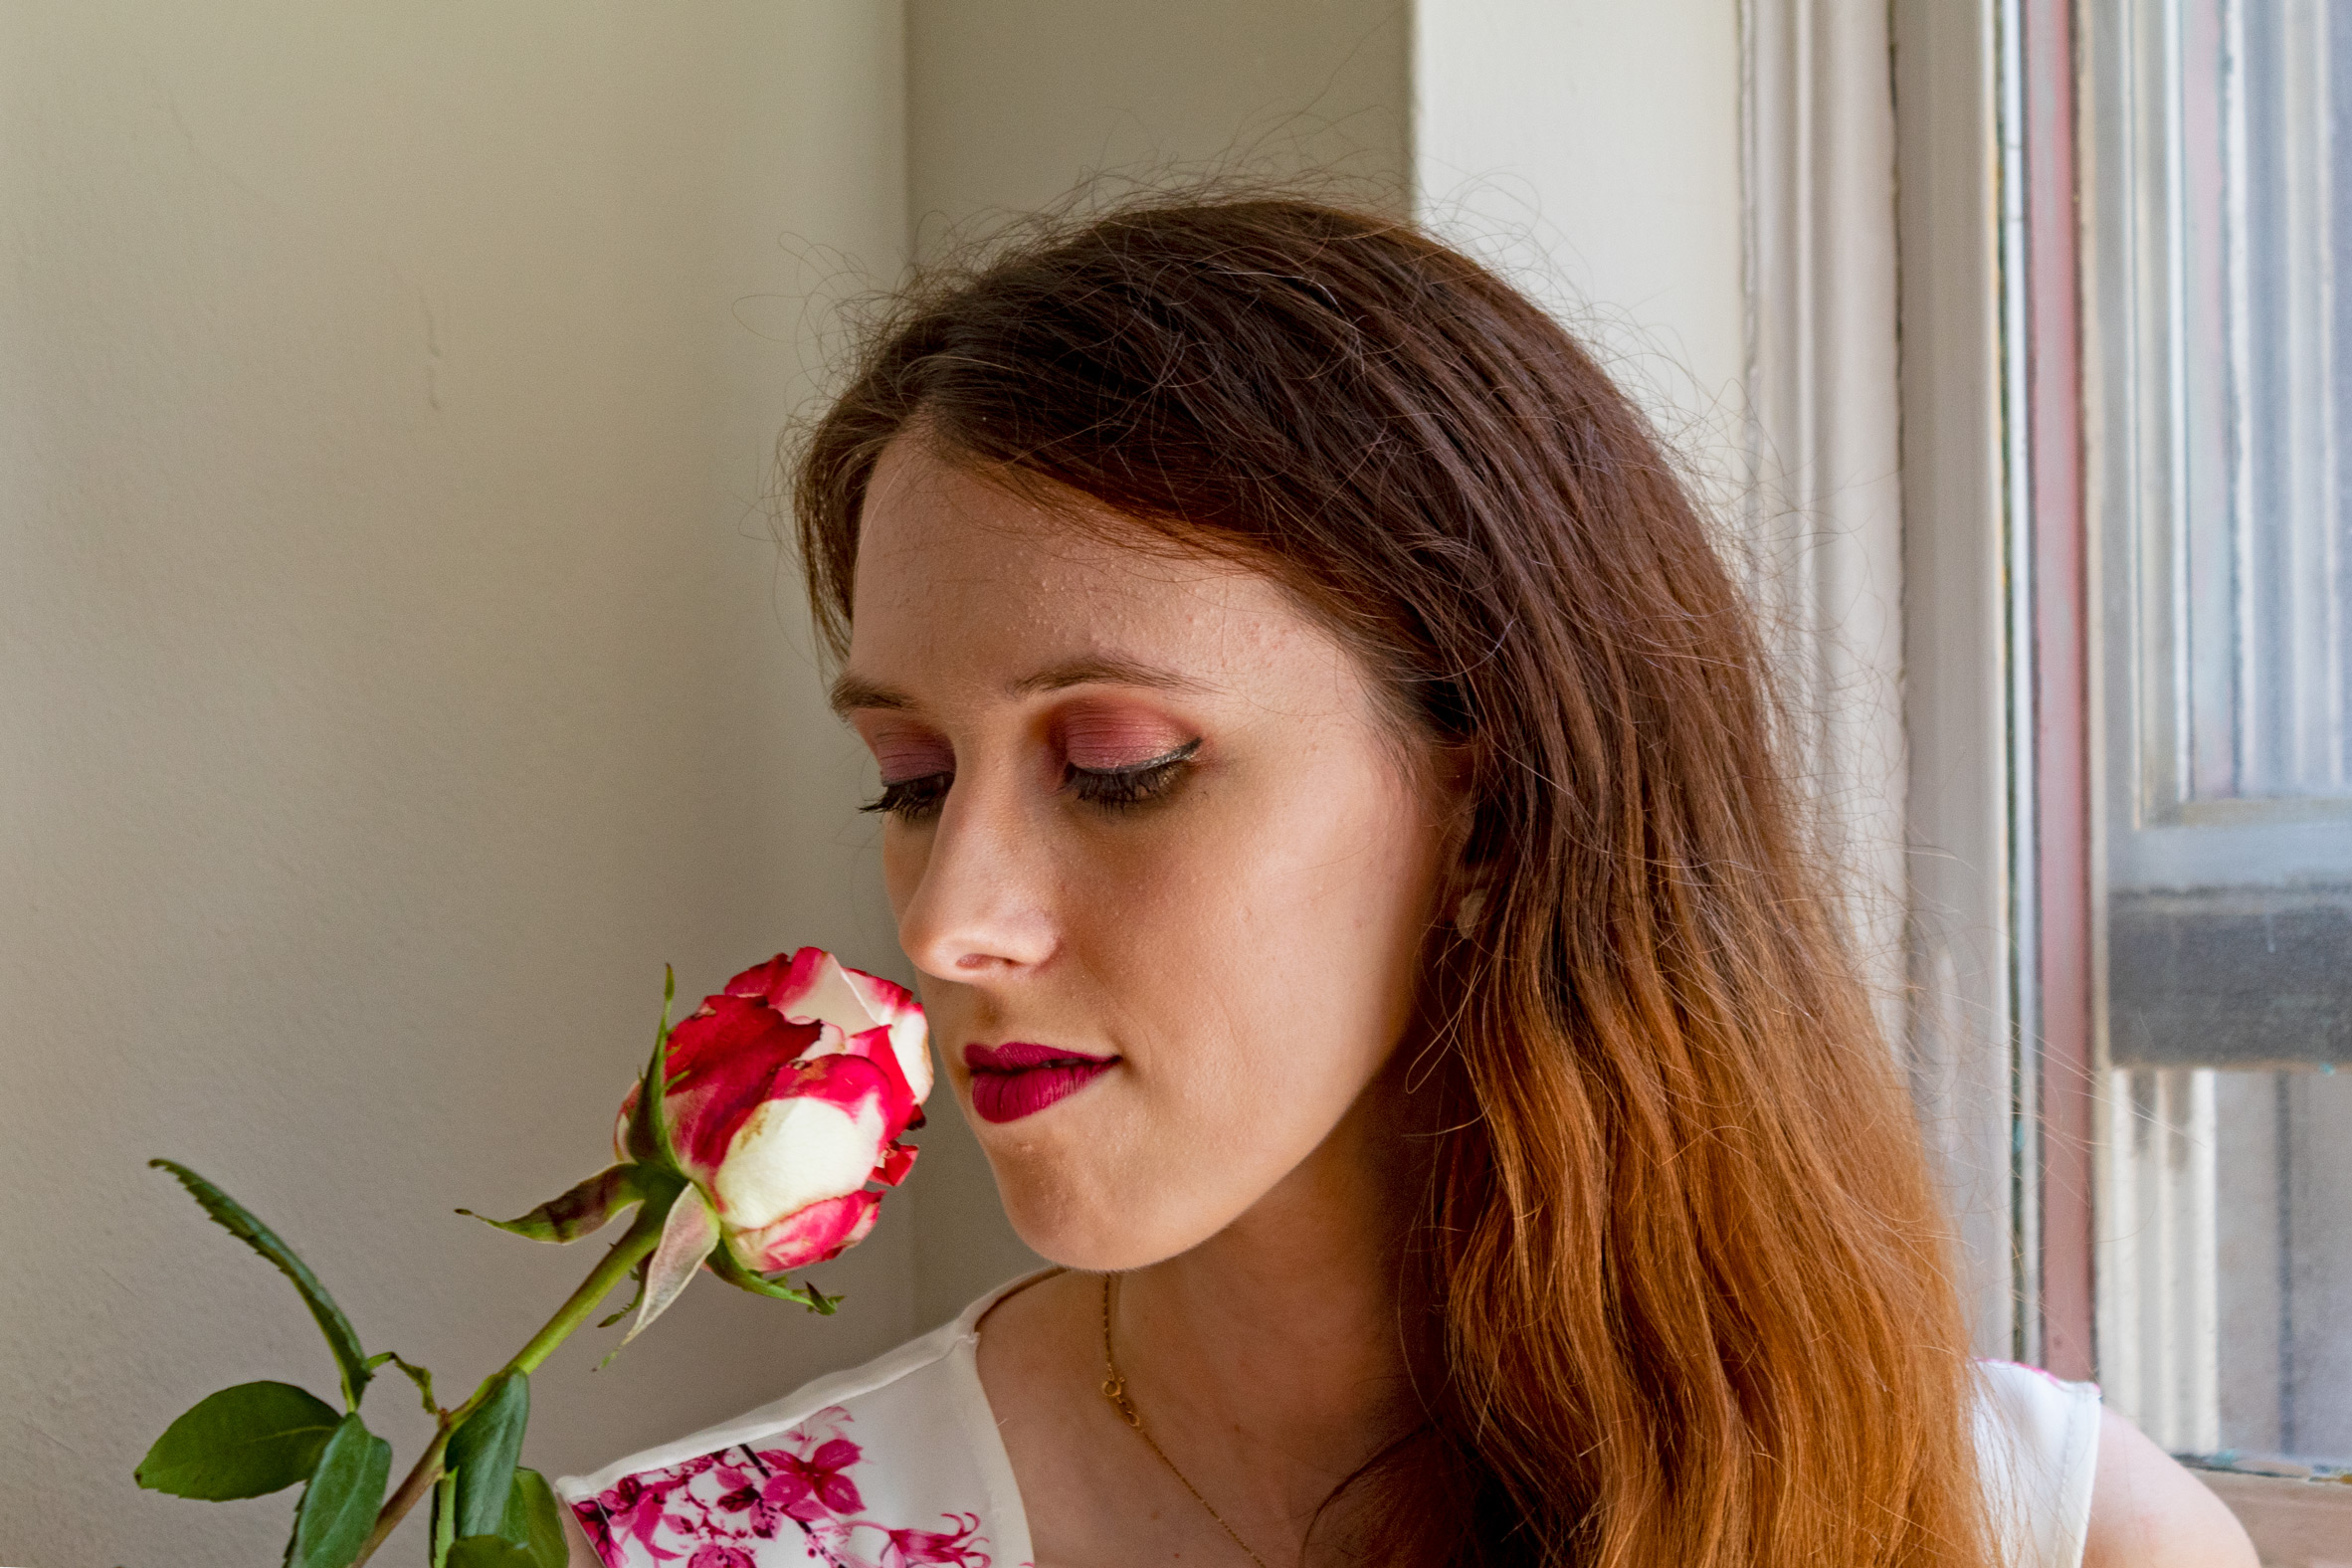 Woman smelling a red and white rose